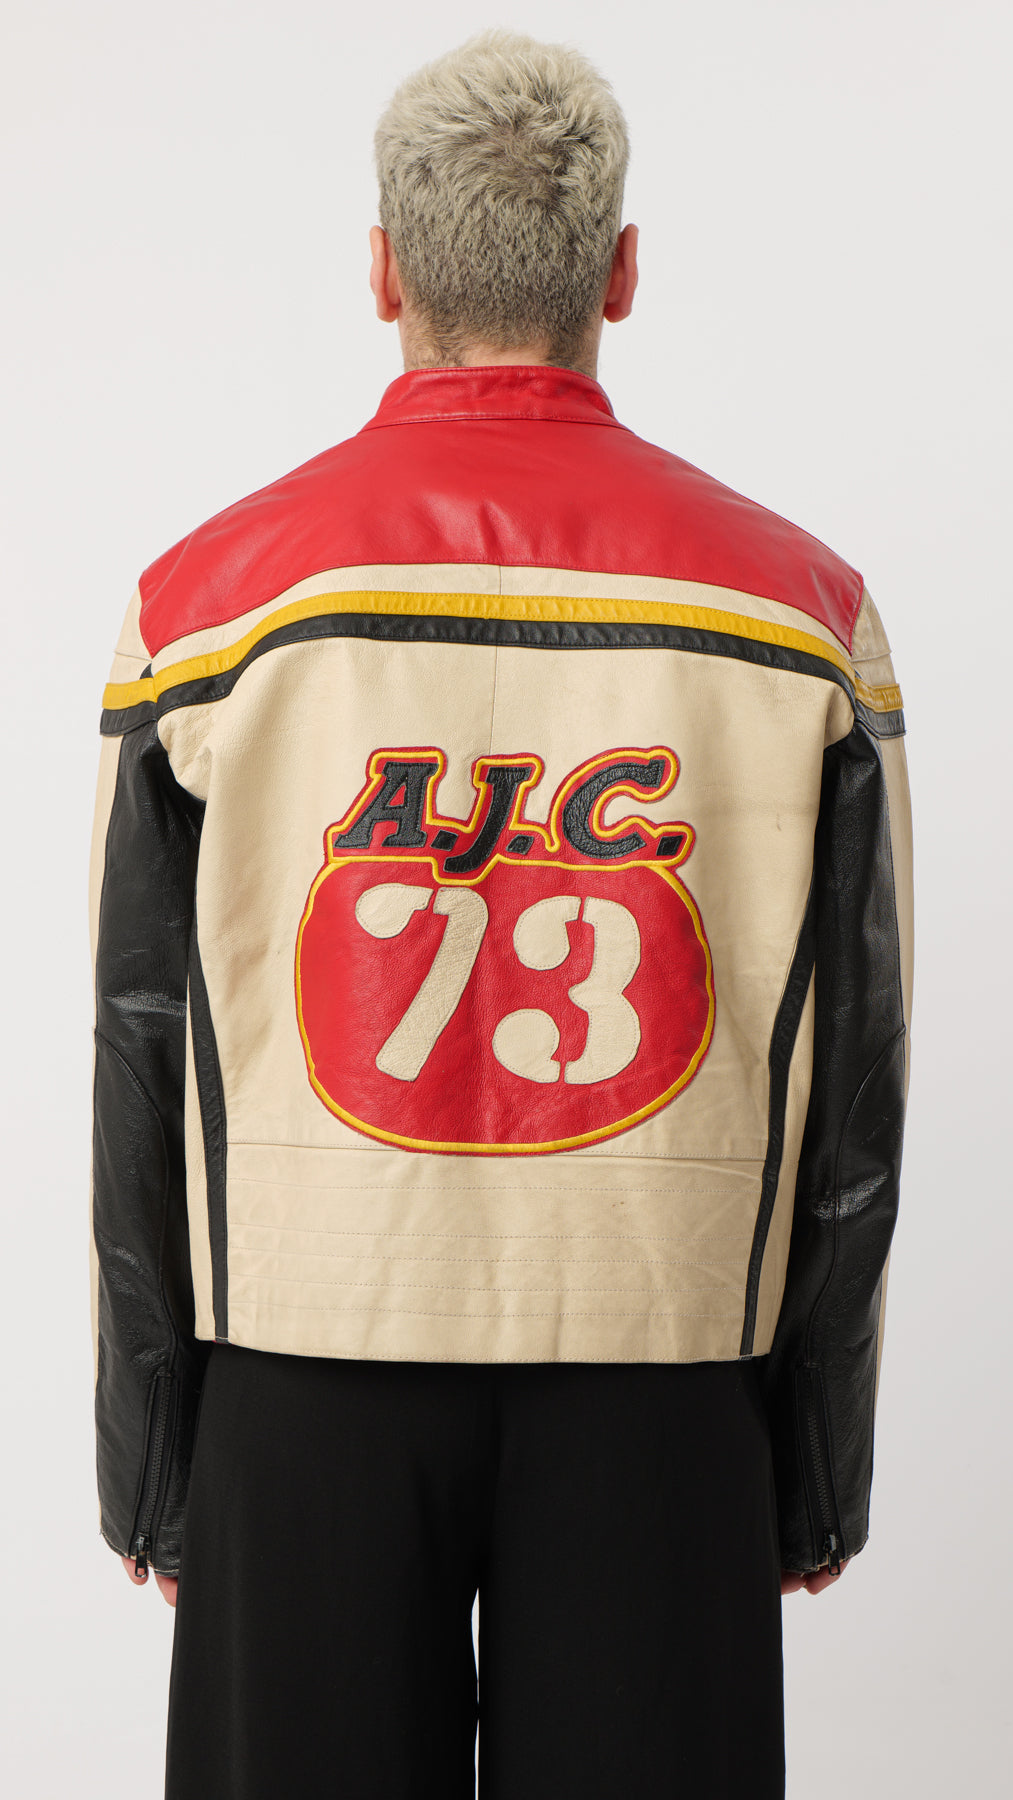 RACER LEATHER JACKET 1990s (M)